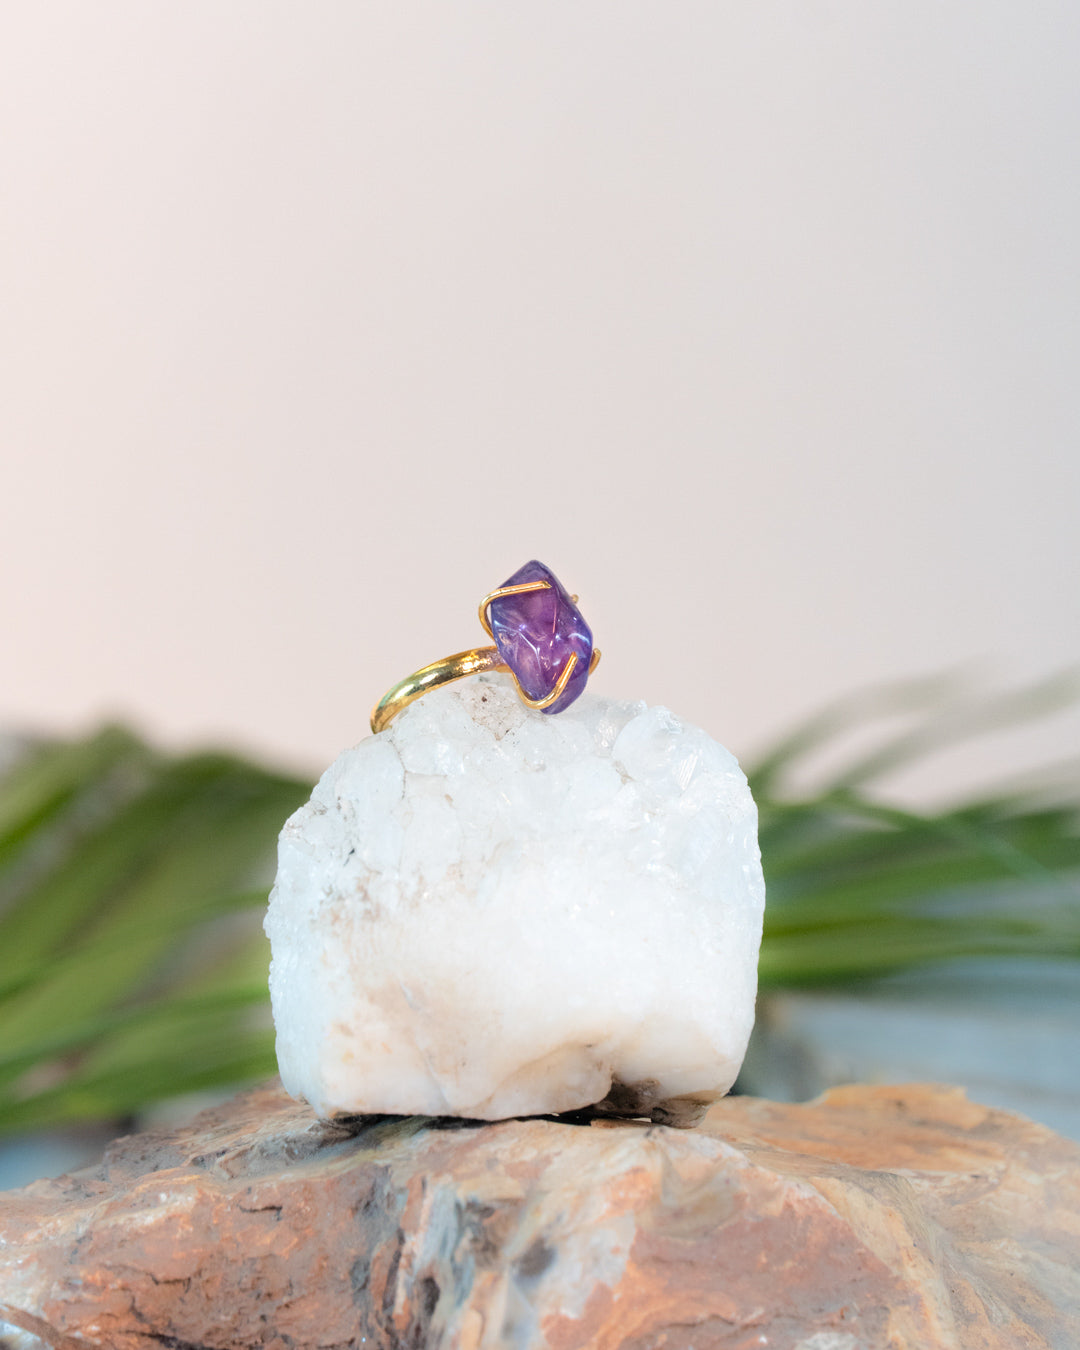 How to Use Amethyst To Calm Anxiety, Fear & Depression? | Gemexi